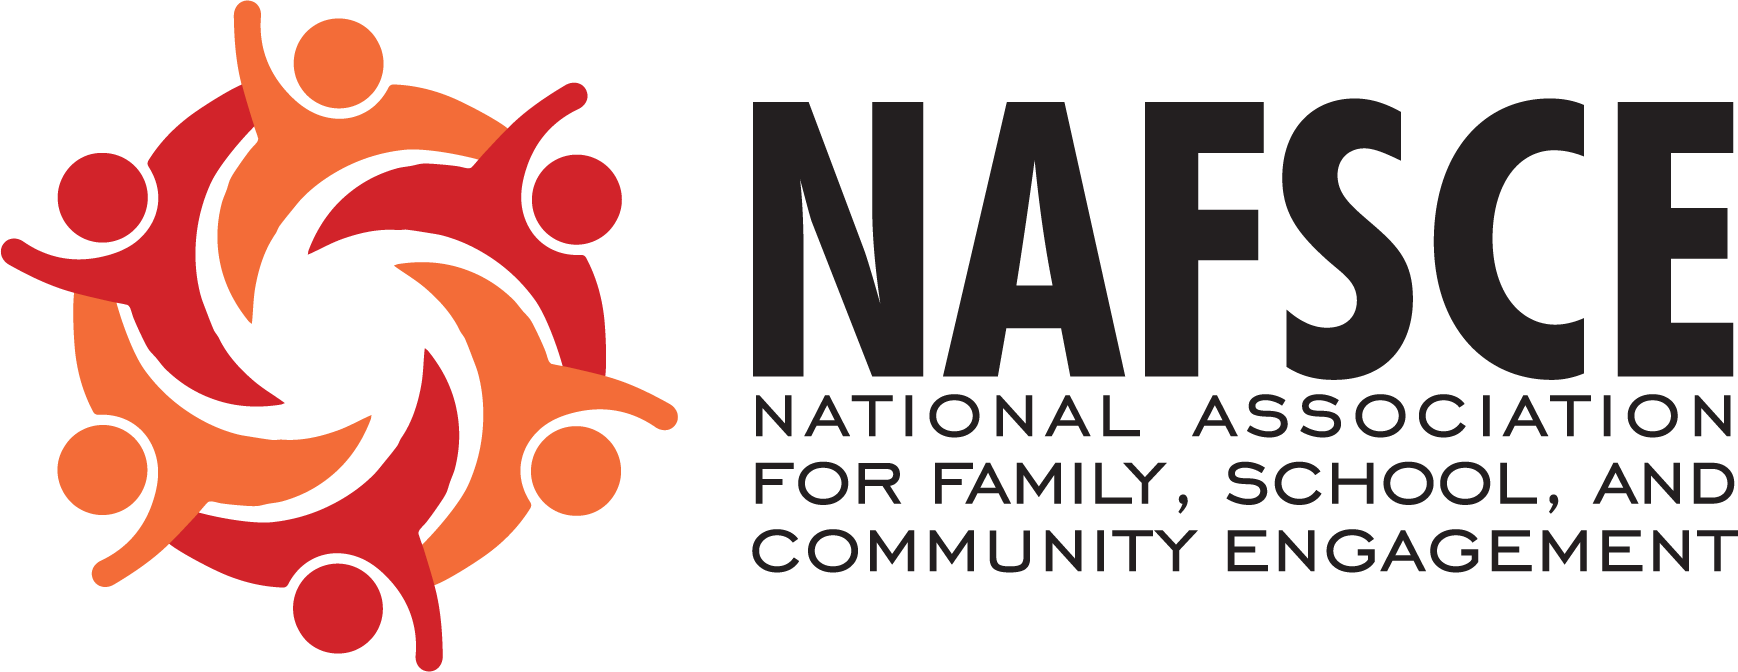 NAFSCE - National Association For Family, School, and Community Engagement Logo